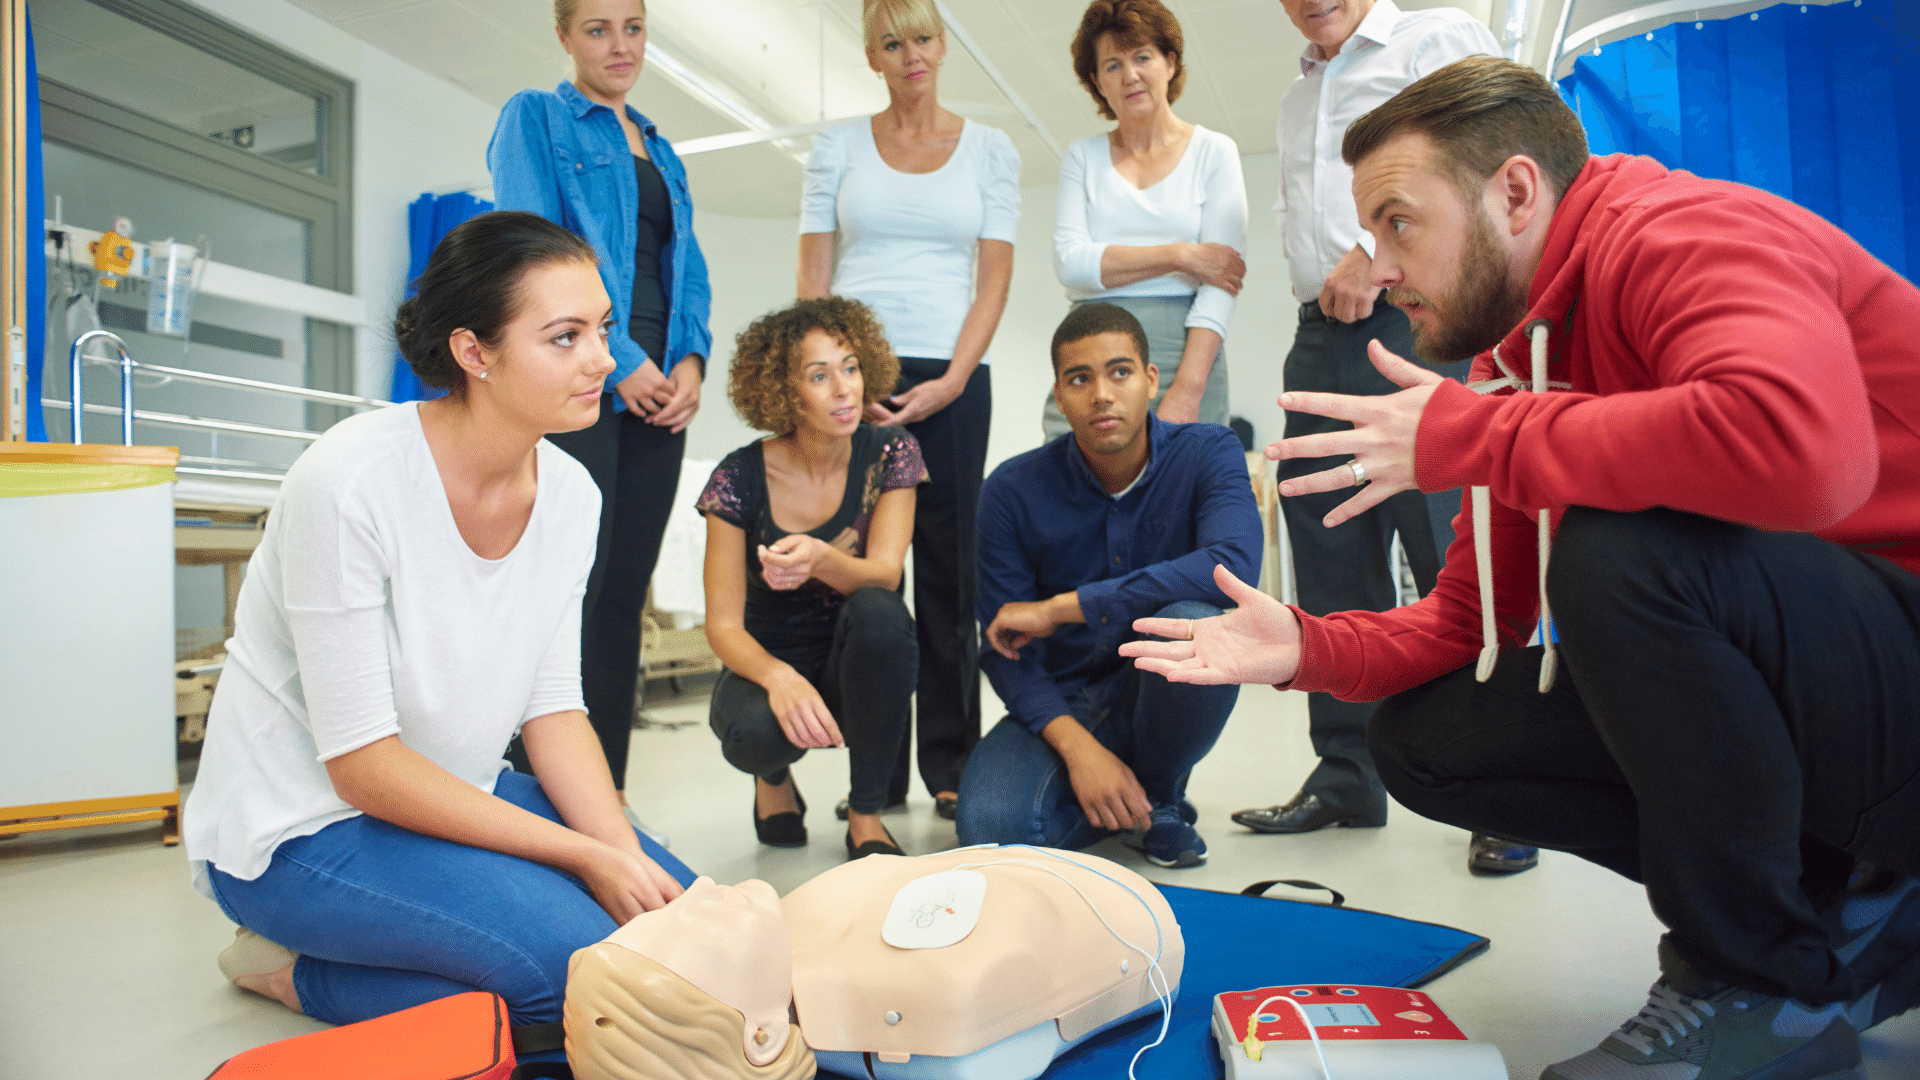 First Aid and CPR training session